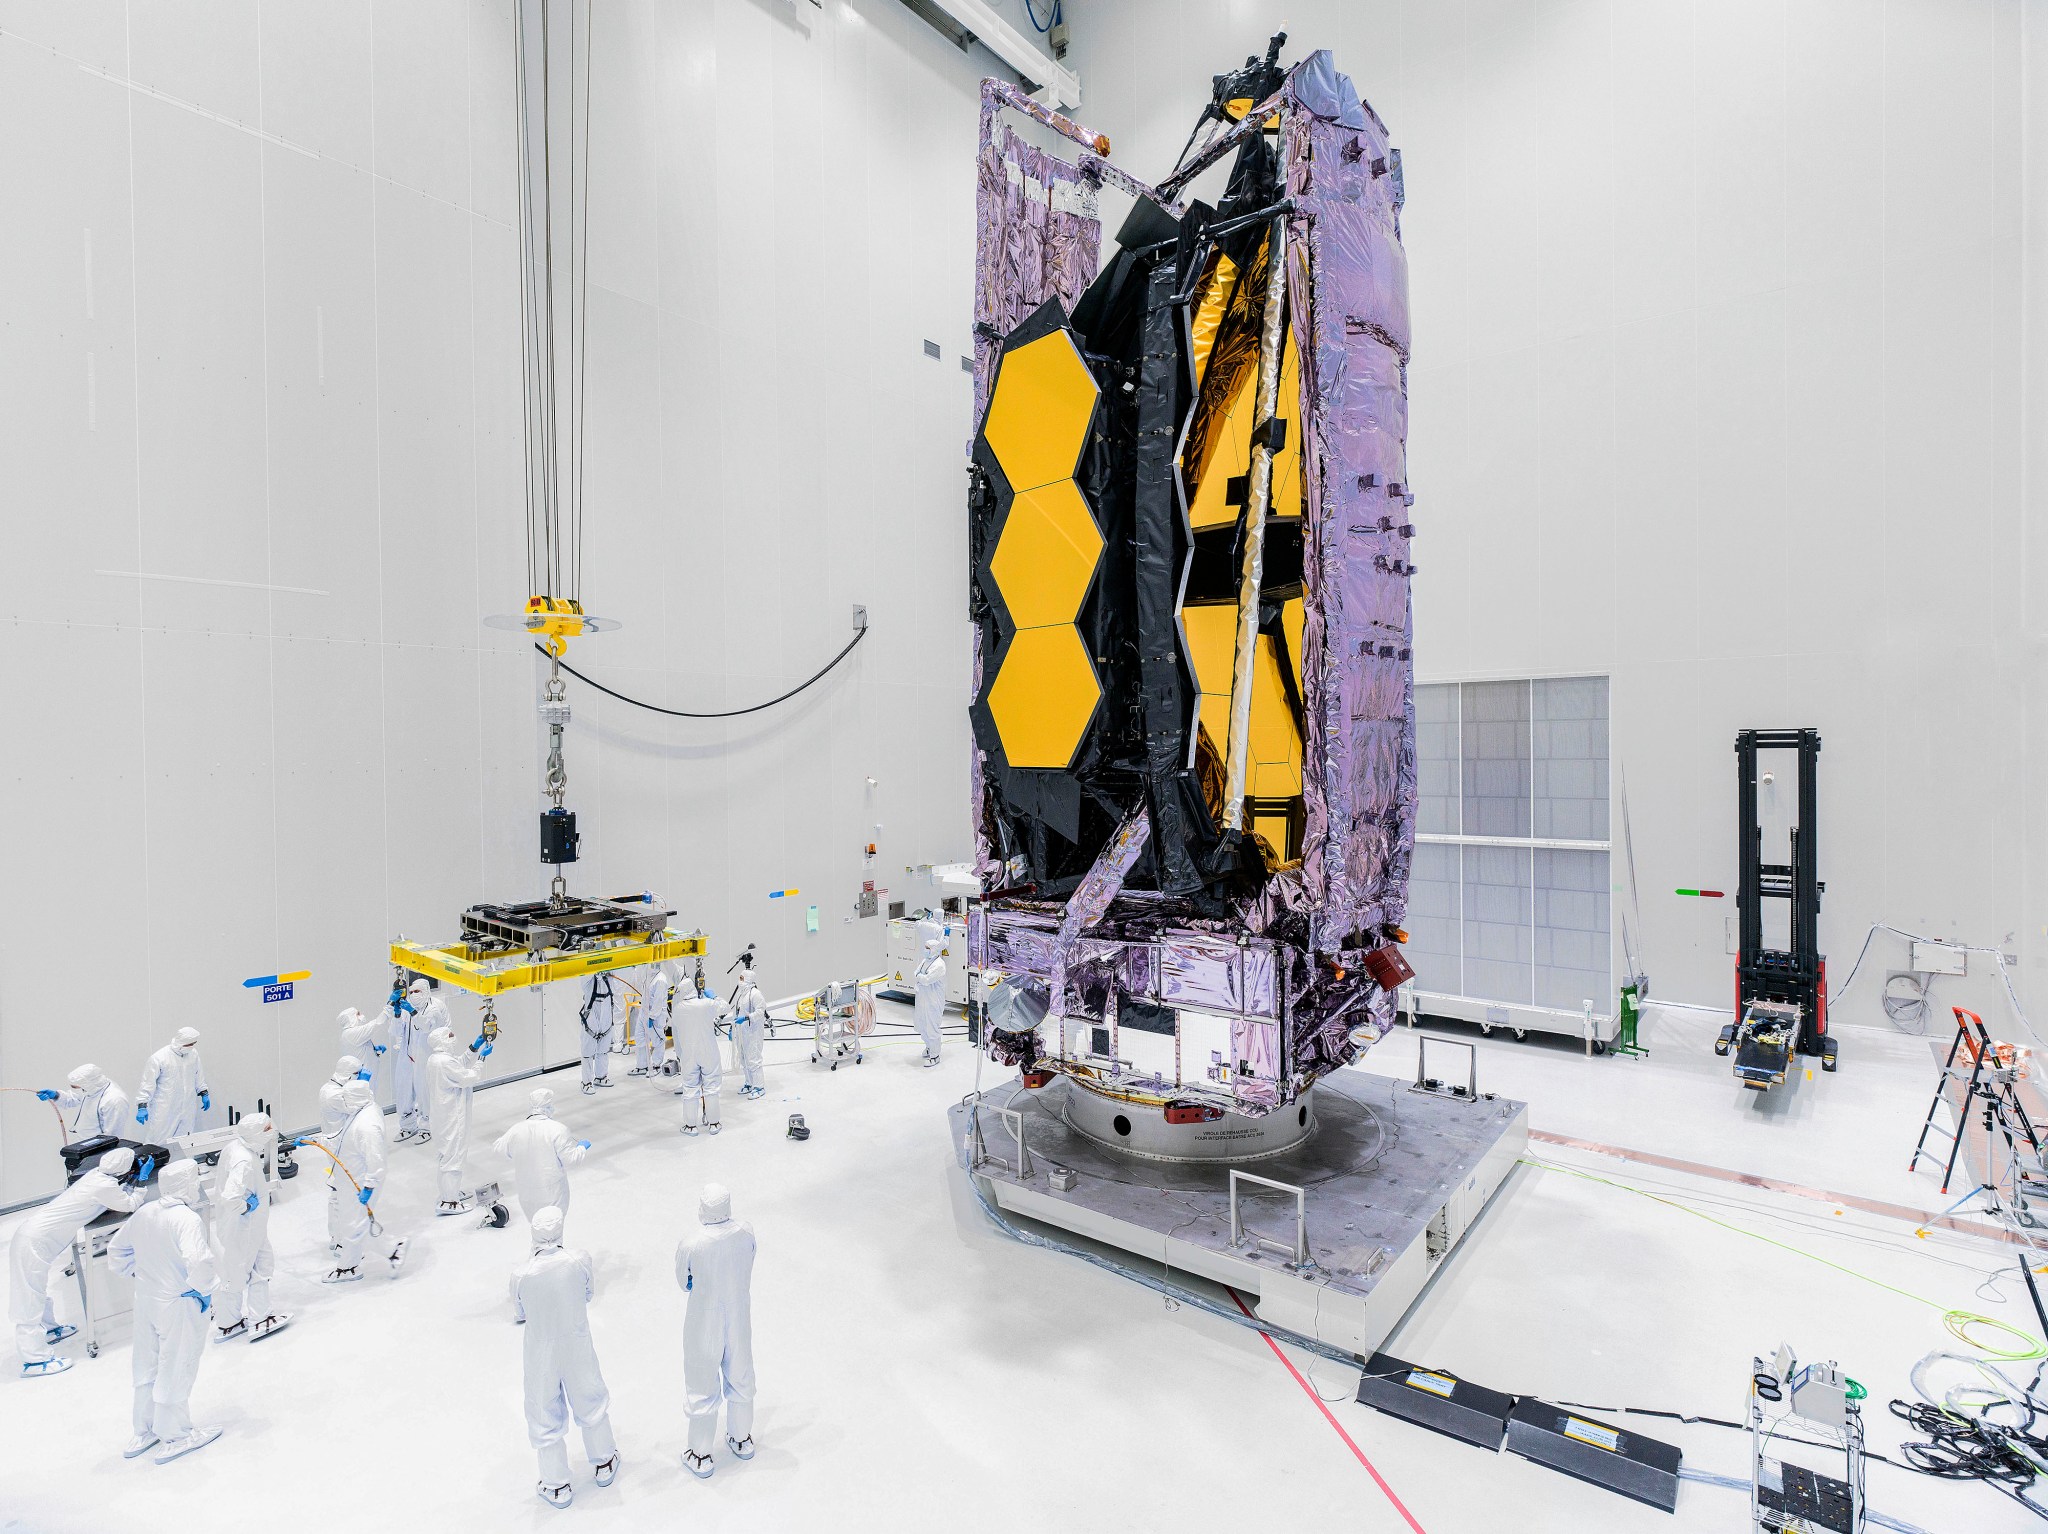 Image taken in a cleanroom at Europe’s Spaceport in Kourou, French Guiana. Dozens of cleanroom technicians, wearing white contamination-control suits and blue gloves, stand towards the left side of this image. On the right side is the Webb telescope in its folded configuration. Its purple sunshield pallets enclose its hexagonal, gold-colored mirror segments. Other hardware, wires, and equipment are located around the cleanroom, which features bright white walls.